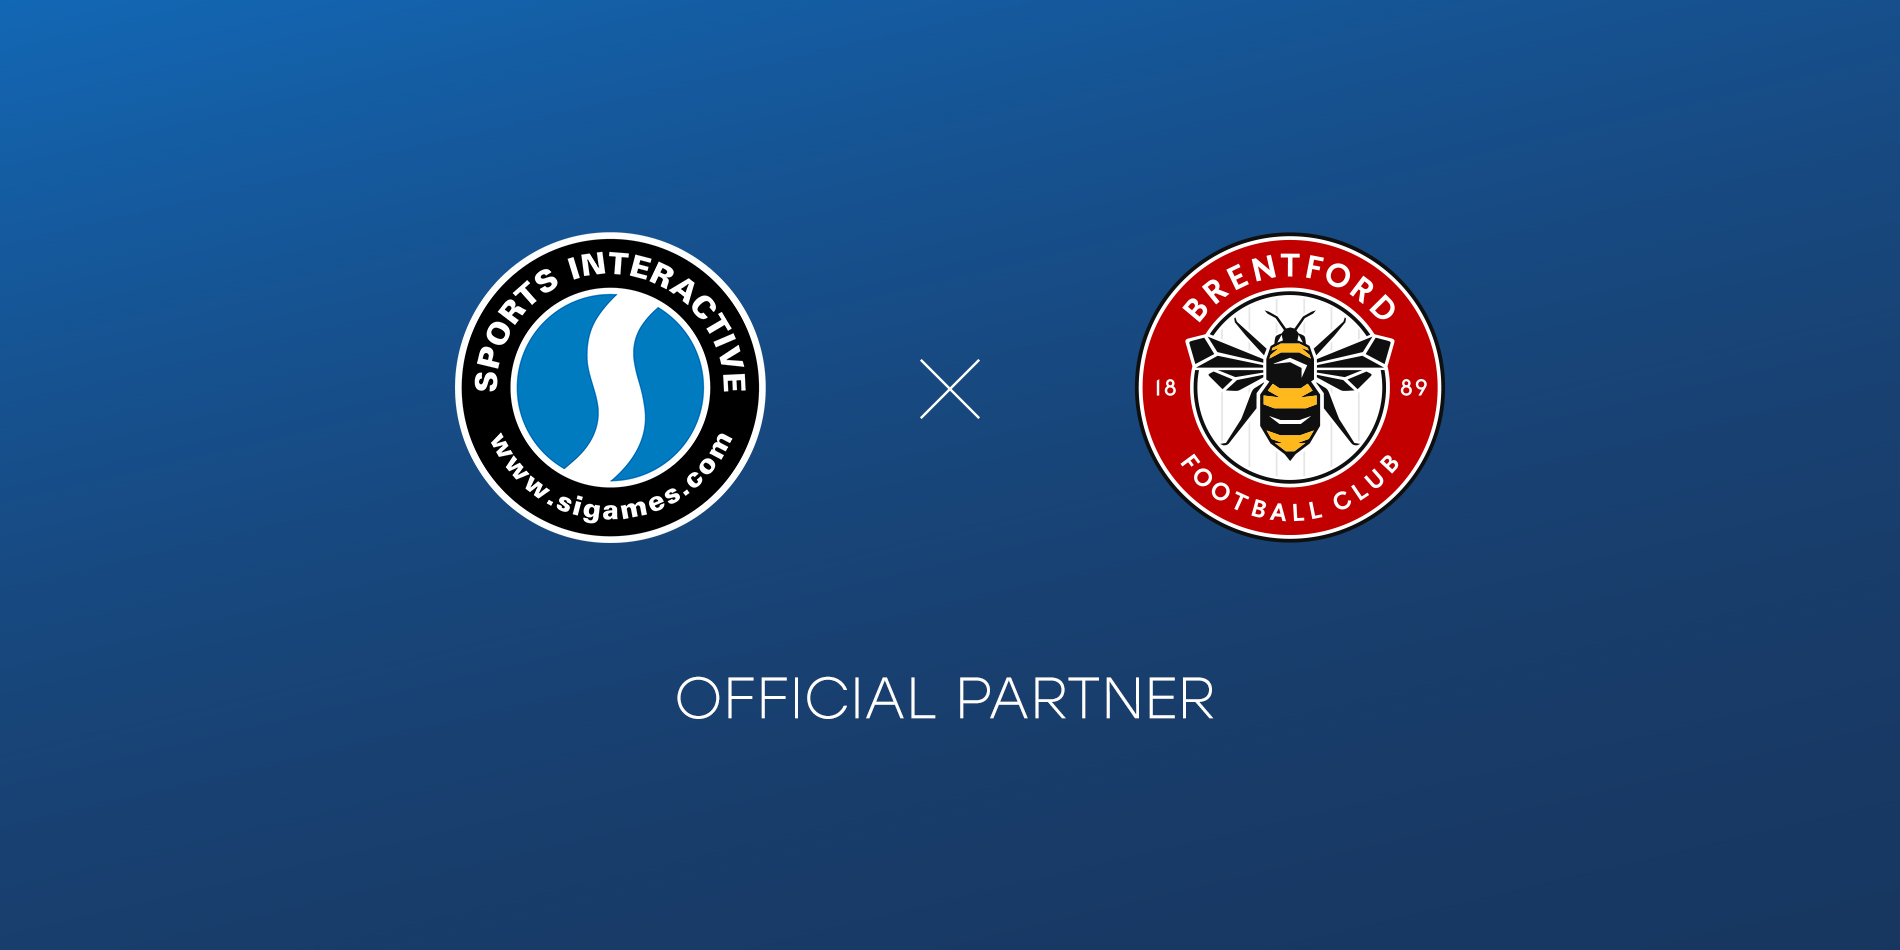 Football Manager continue as Brentford Football Club Official Partner